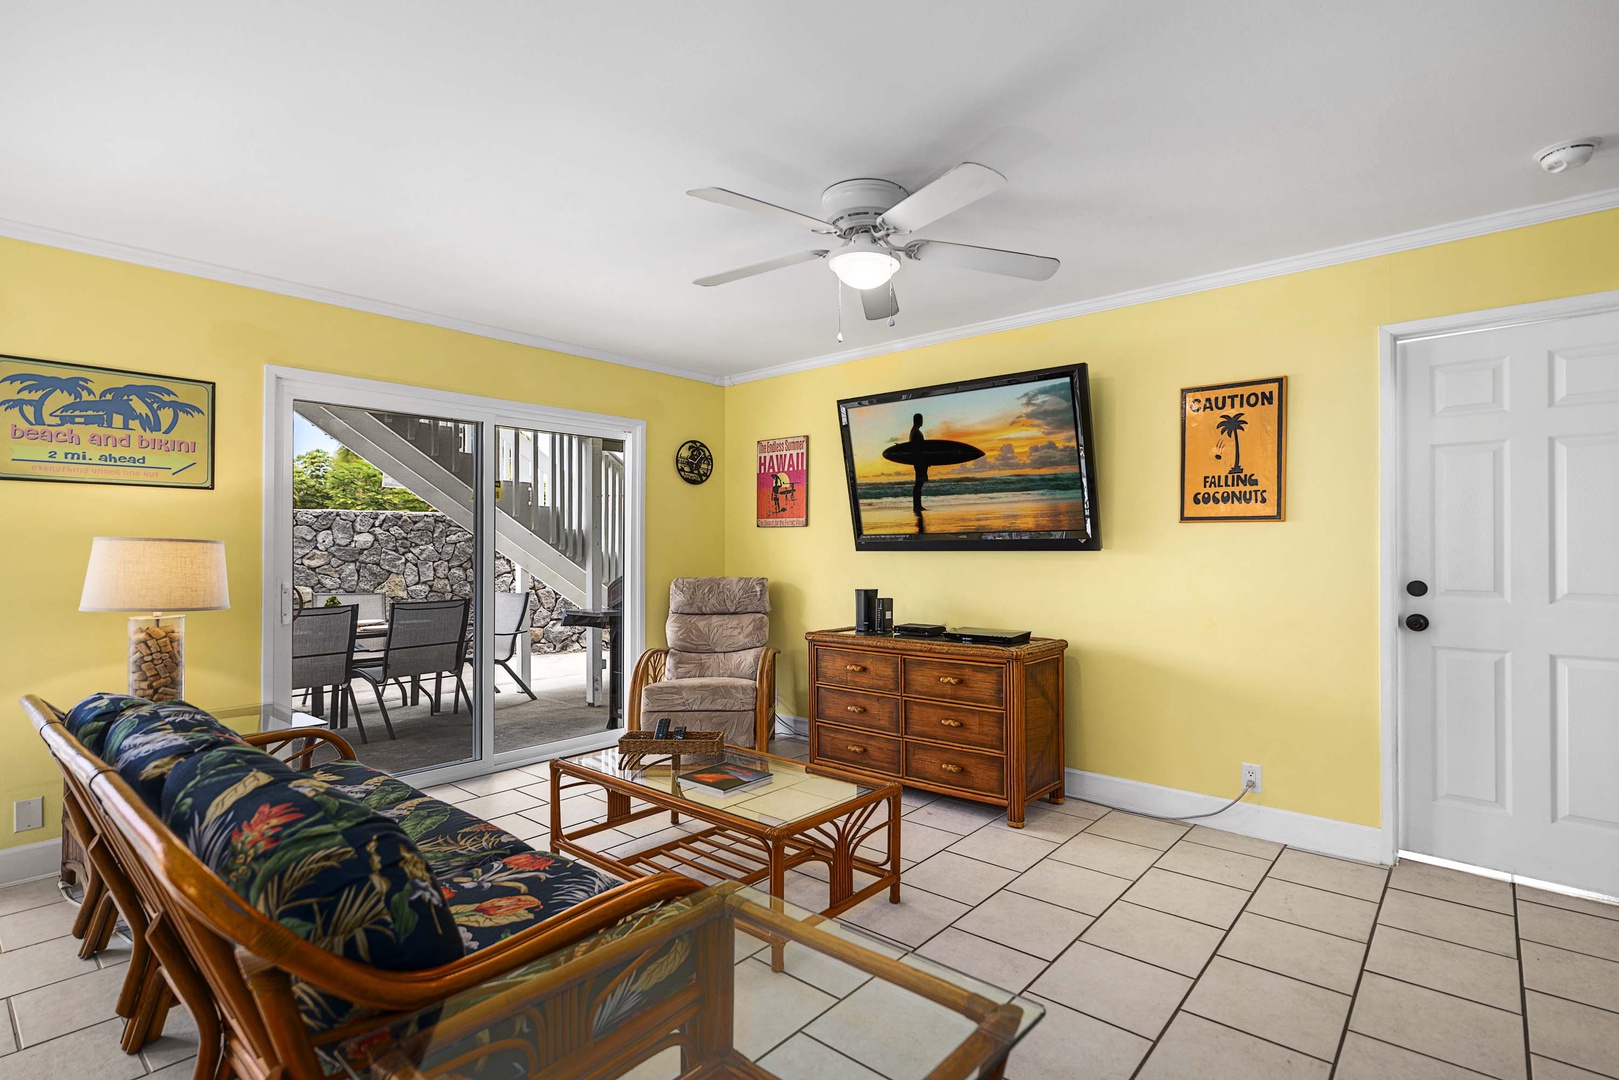 Kailua Kona Vacation Rentals, Hale A Kai - Ceiling fans and cross breezes make this space comfortable